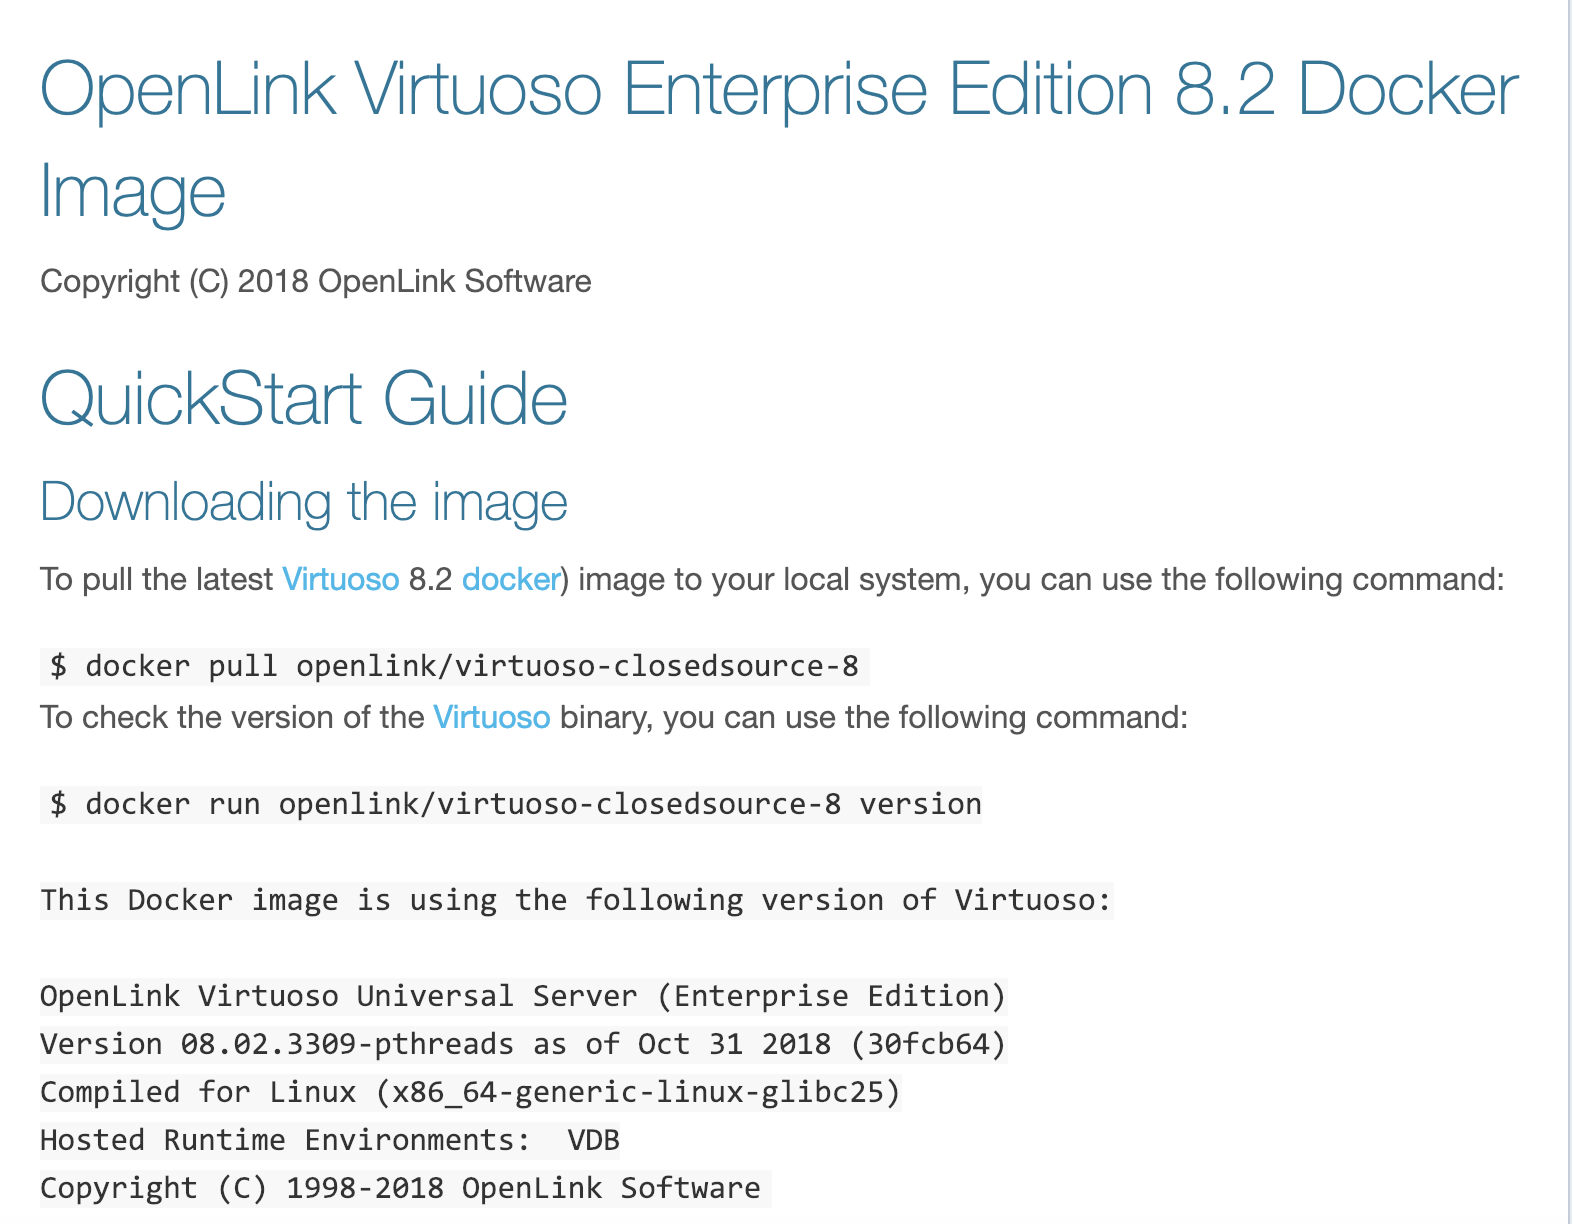 http://www.openlinksw.com/images/virtuoso-82-docker-container-1.png